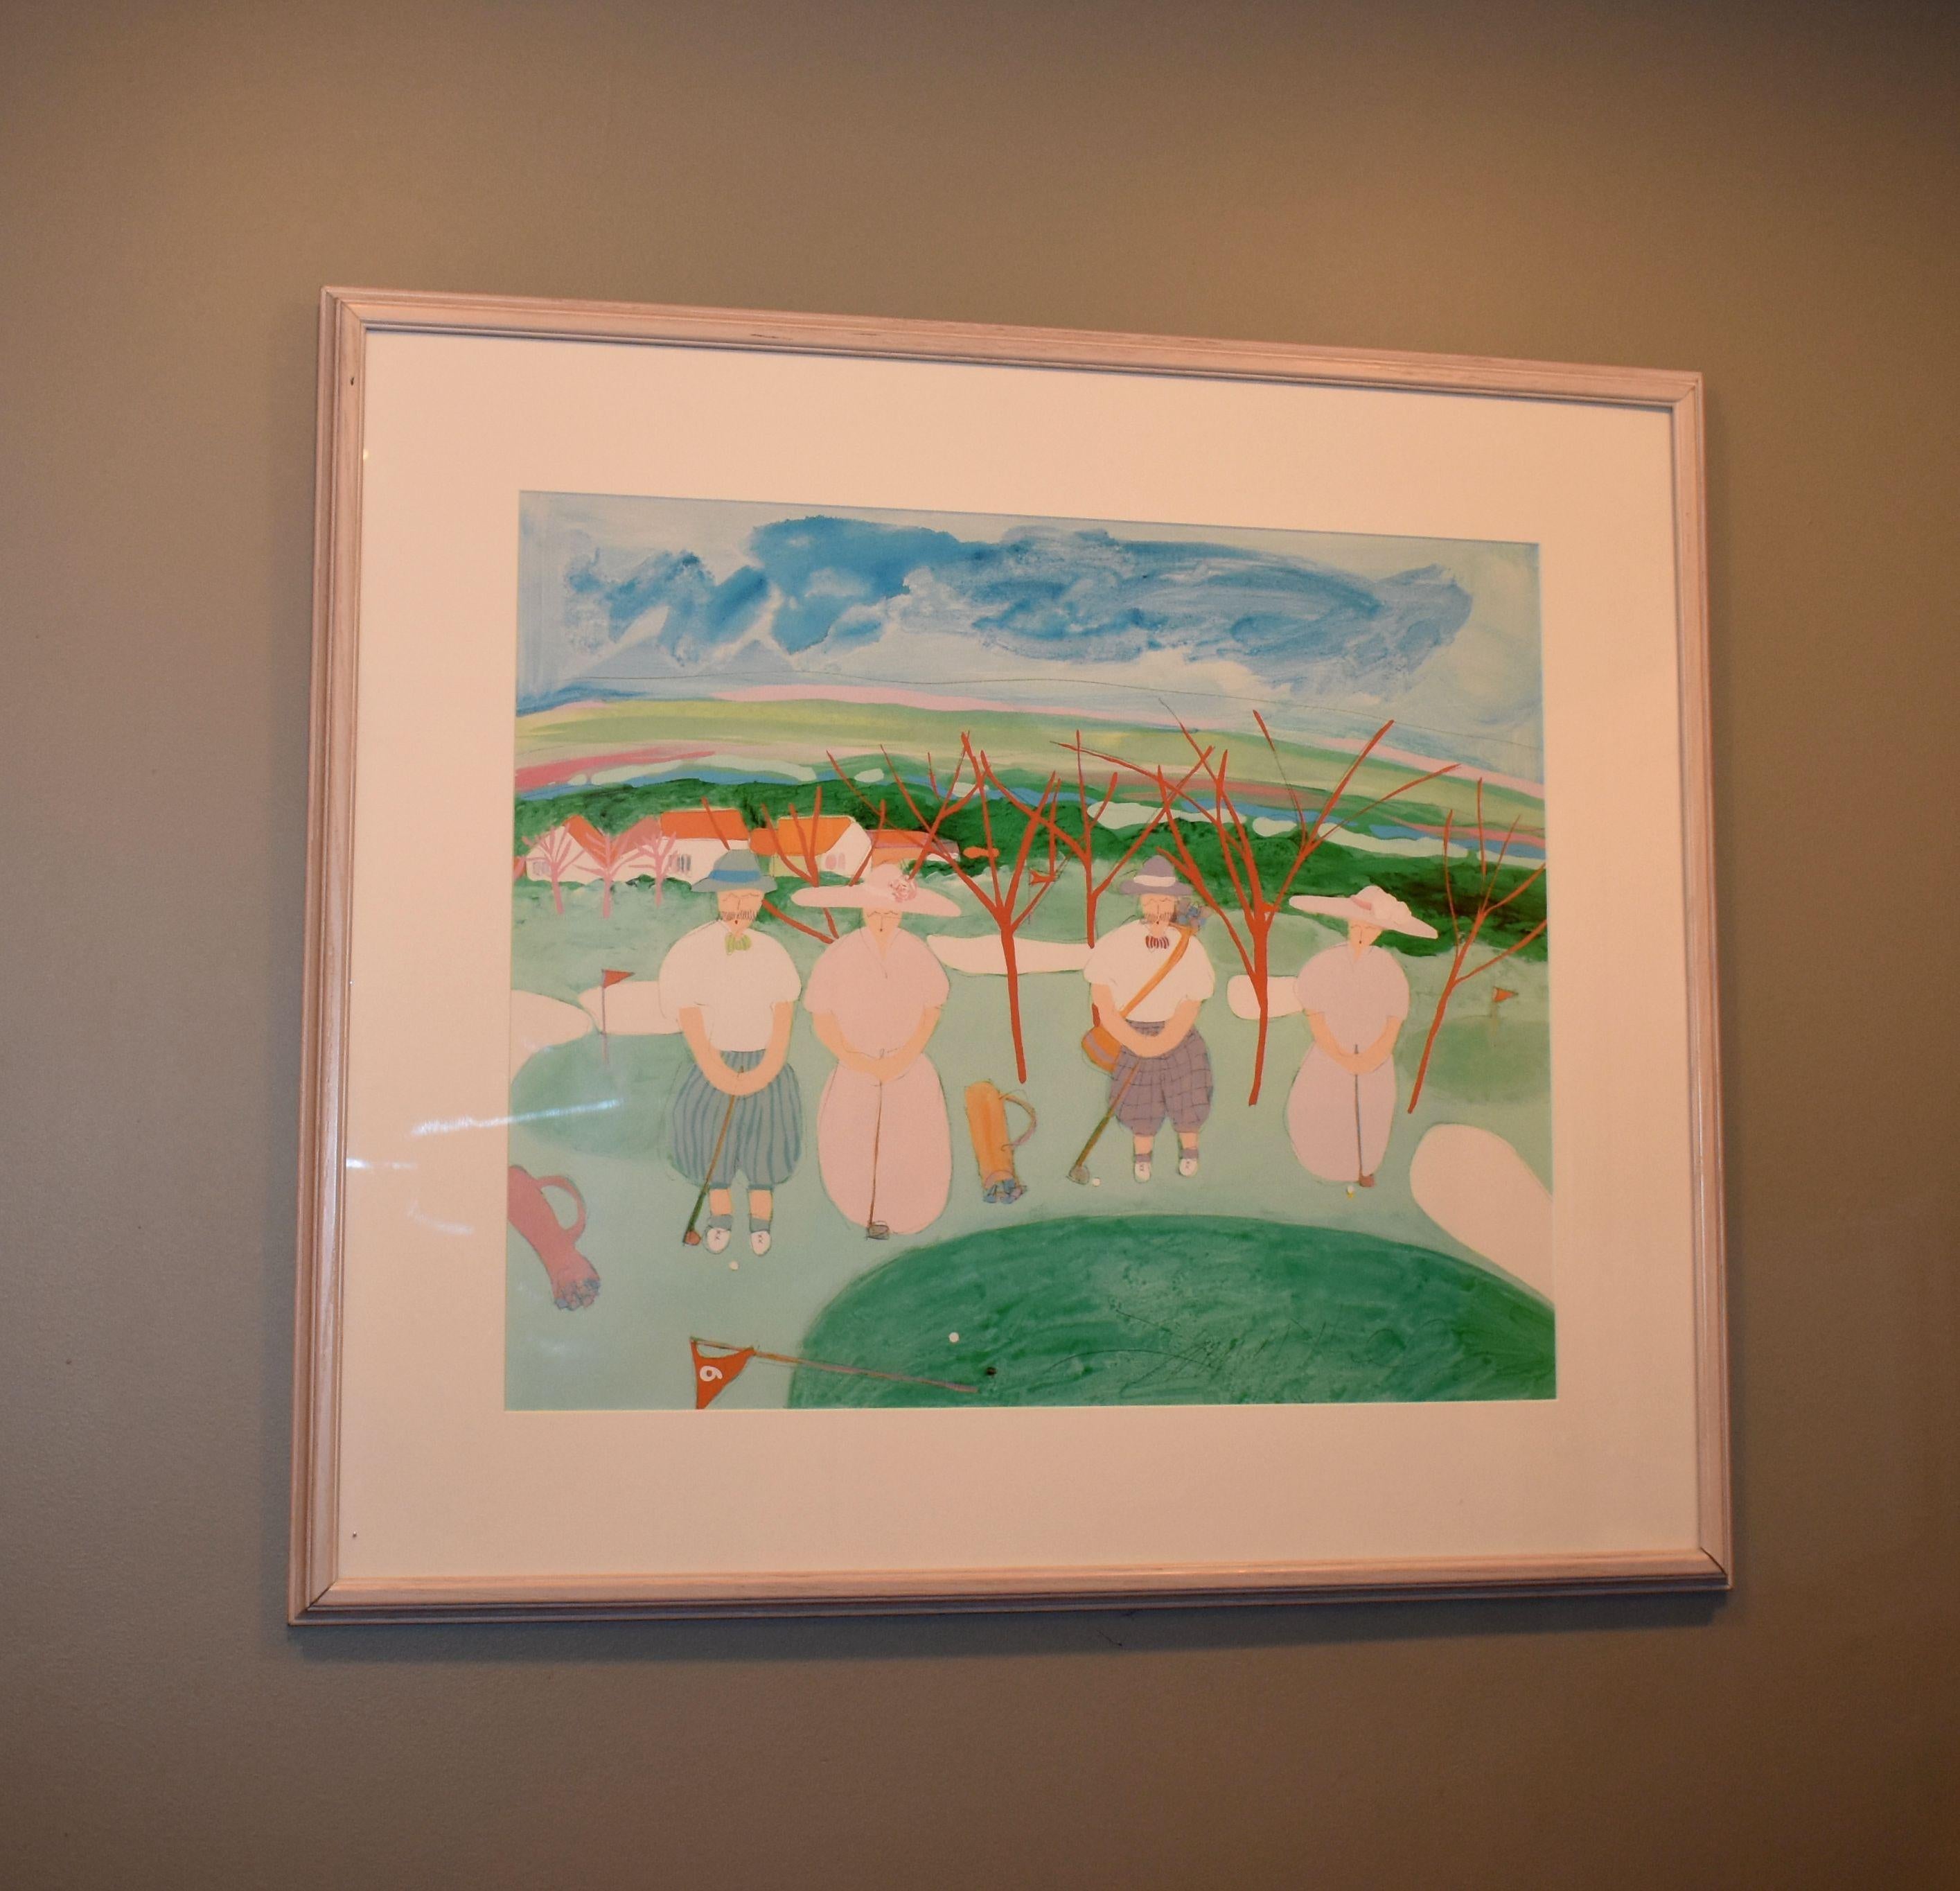 Hand signed in pencil limited edition golf scene lithograph by Jim Hill
Jim Hill is currently a professor of art at lone star college and Houston community colleges.
After receiving an from the university of Arkansas in 1978 Mr Hill moved to